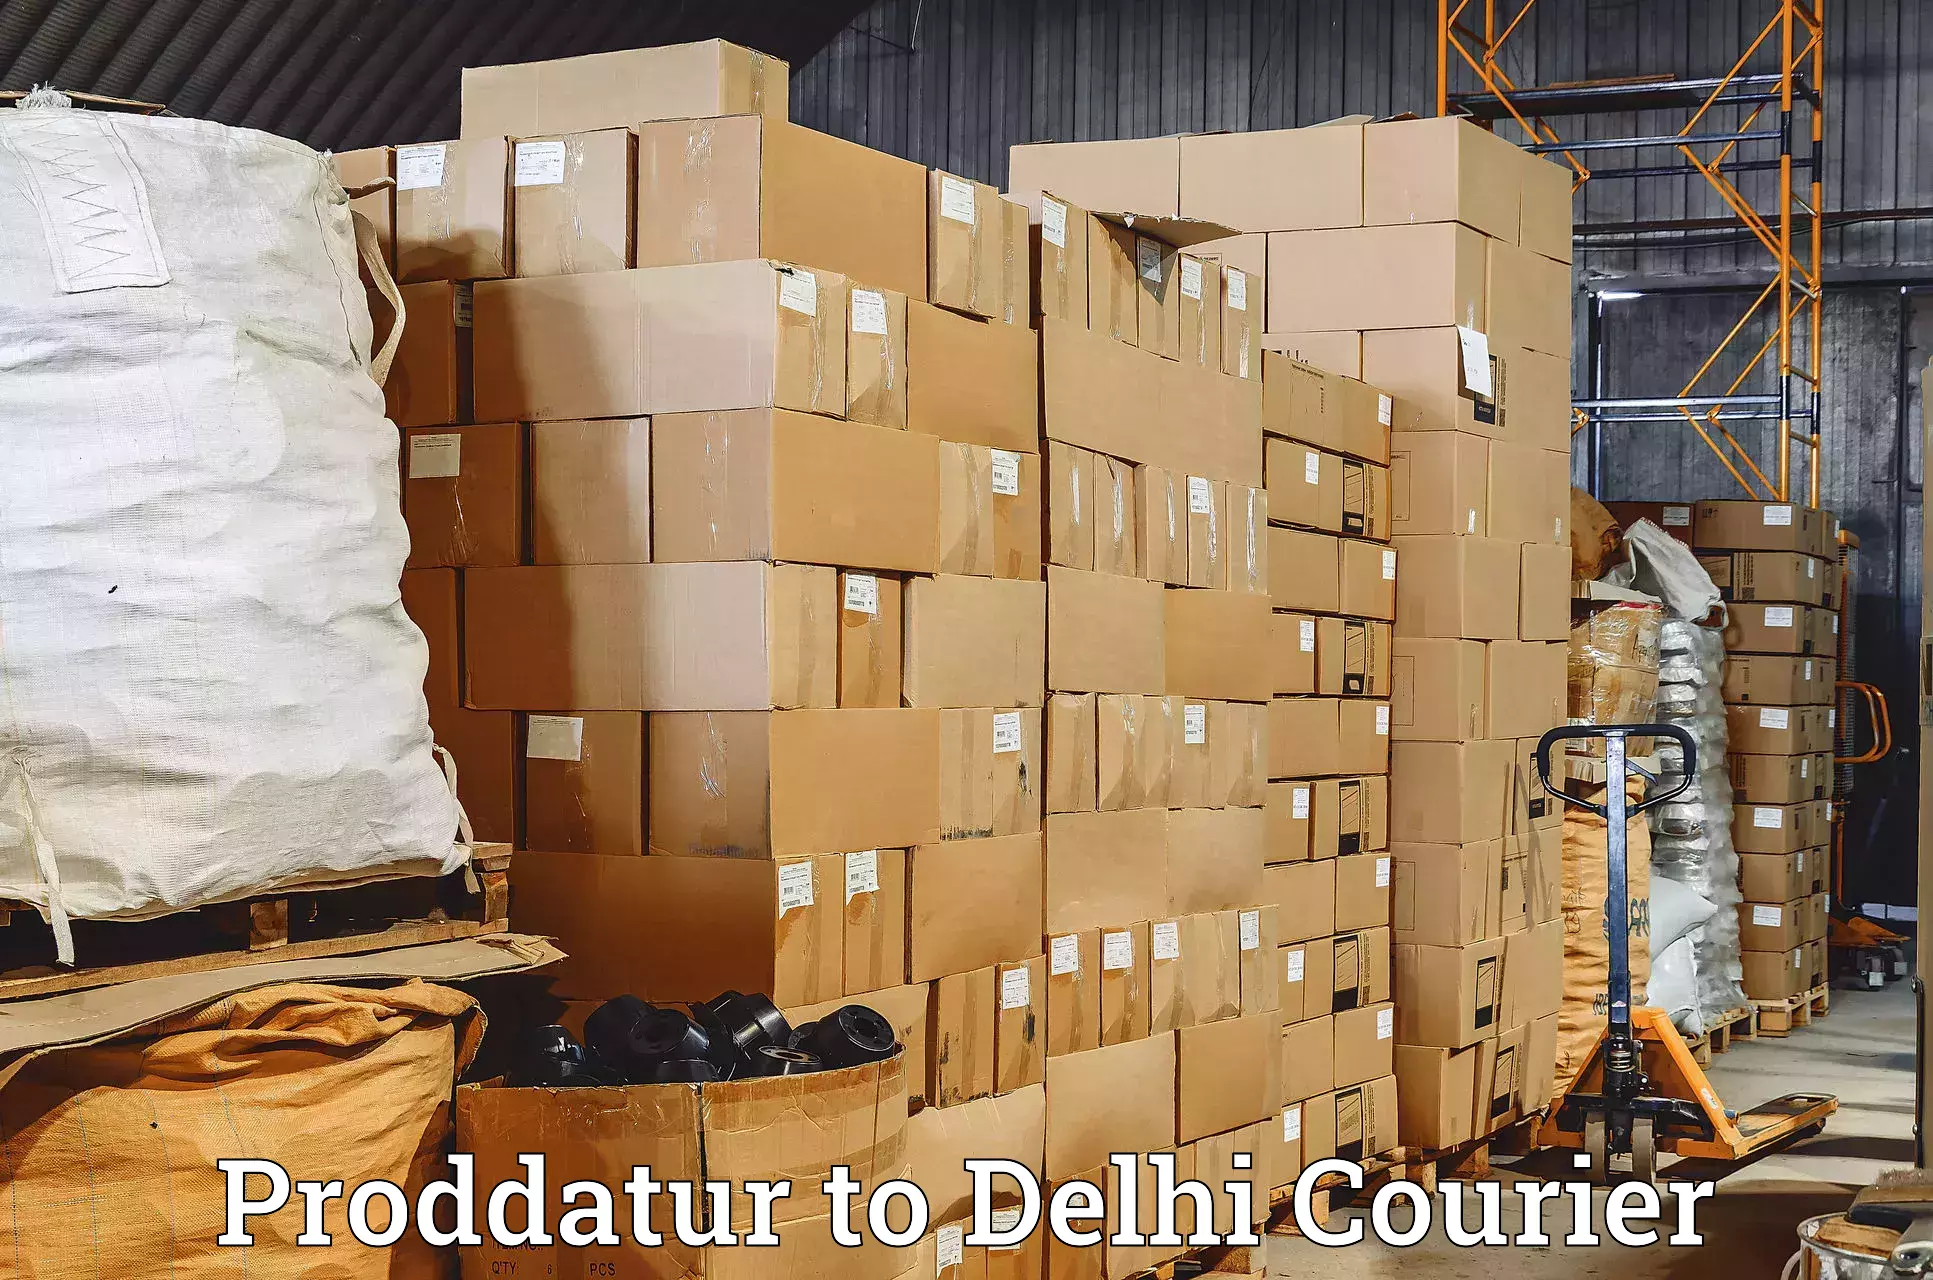 Seamless shipping experience Proddatur to Lodhi Road